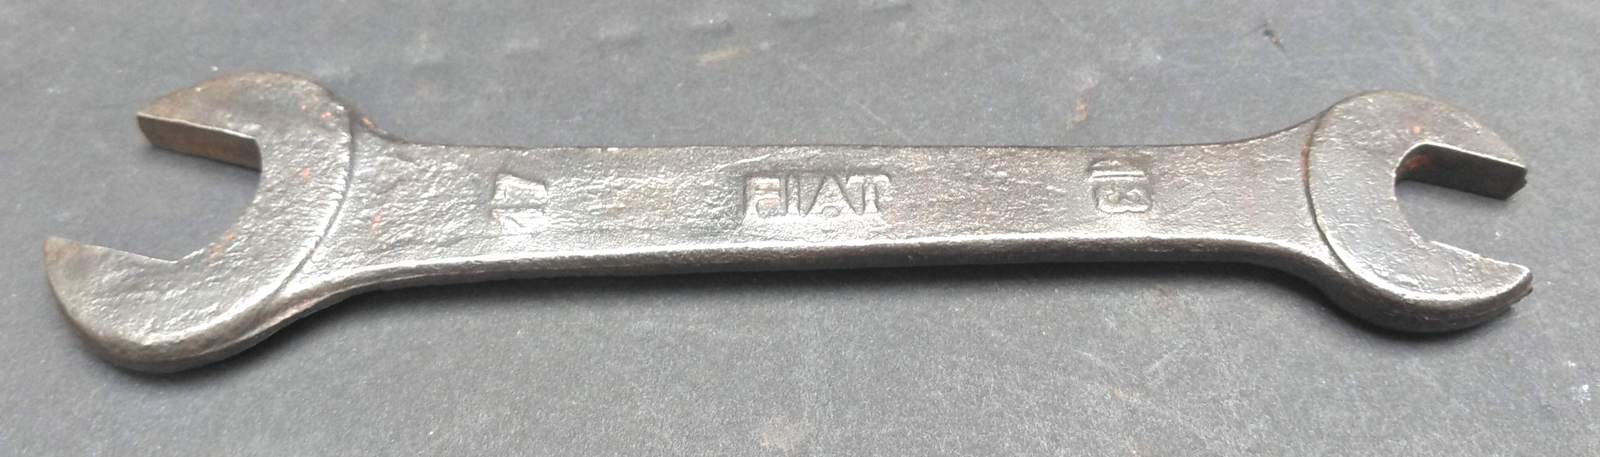 Primary image for Vintage Original Fiat Metric Wrench 13mm 17mm Open End